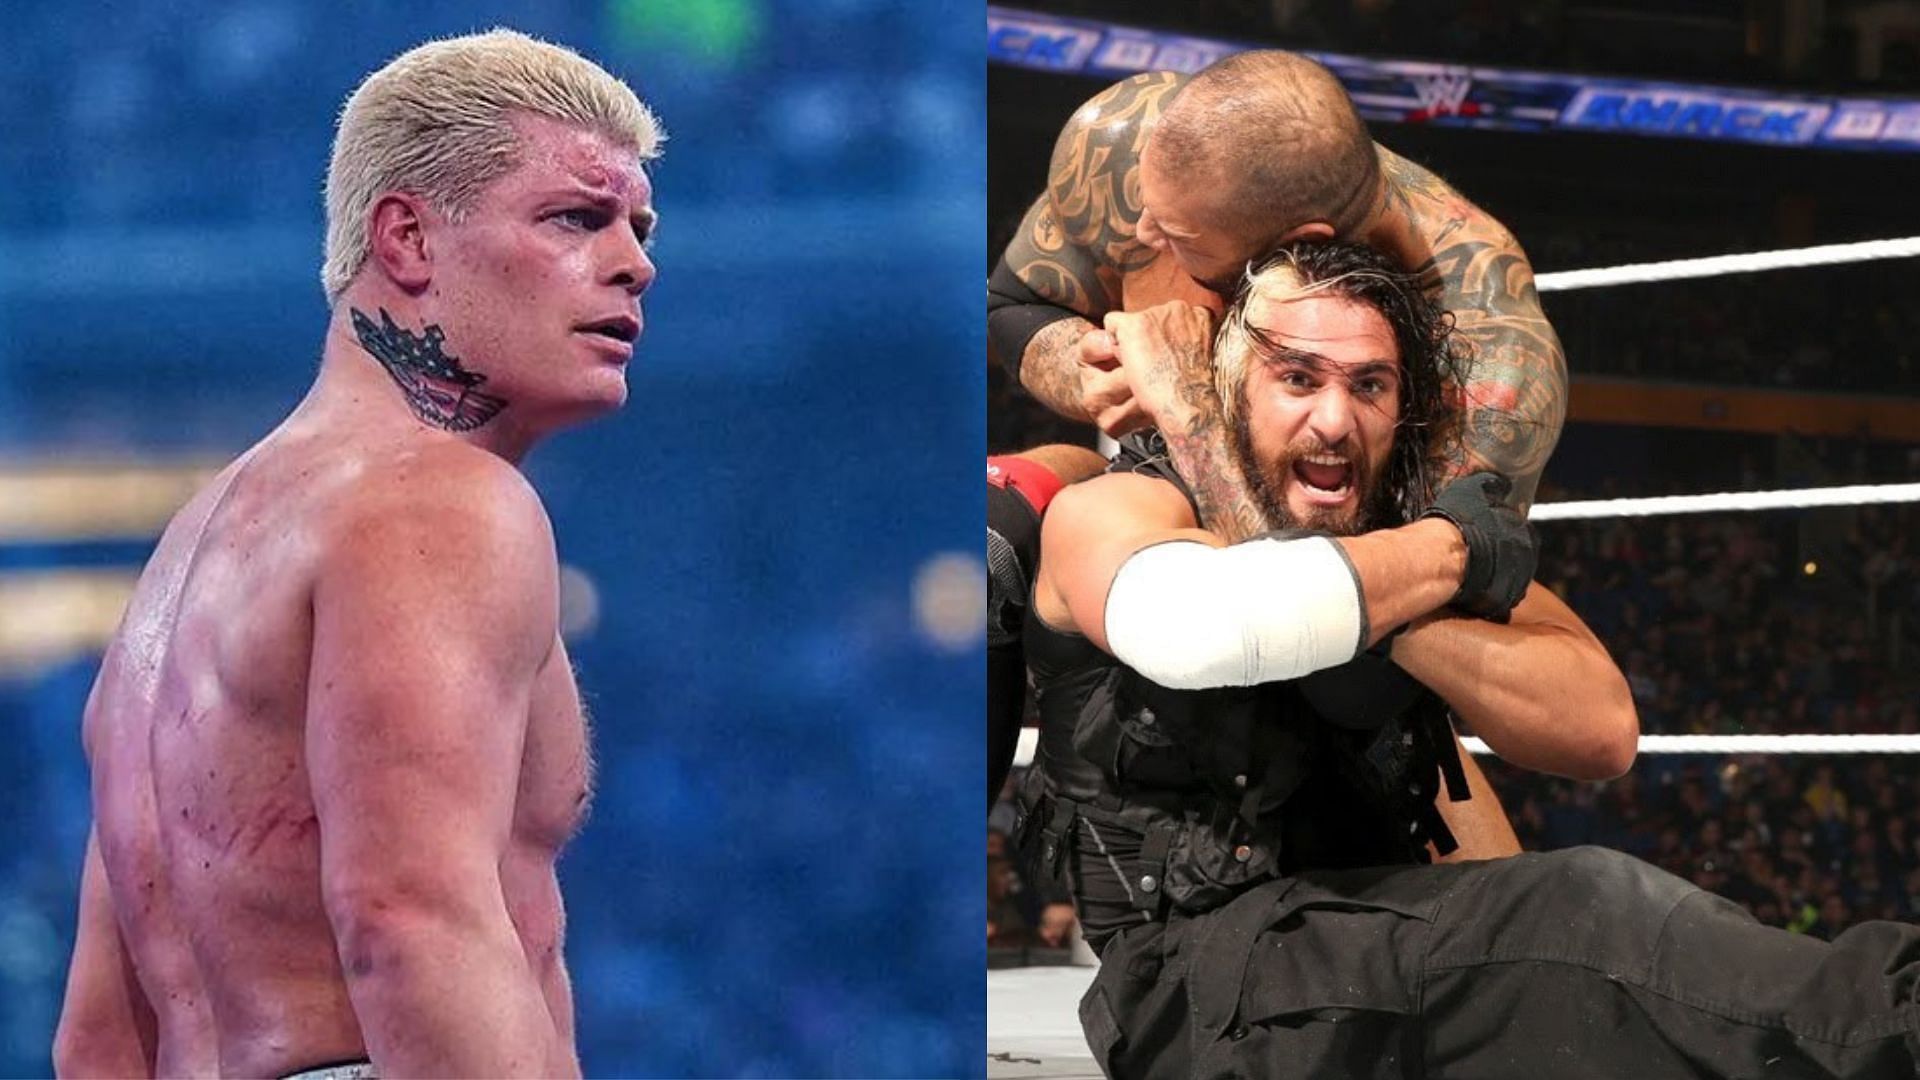 A Hall of Famer thinks Cody Rhodes is on the same level as Batista and Seth Rollins